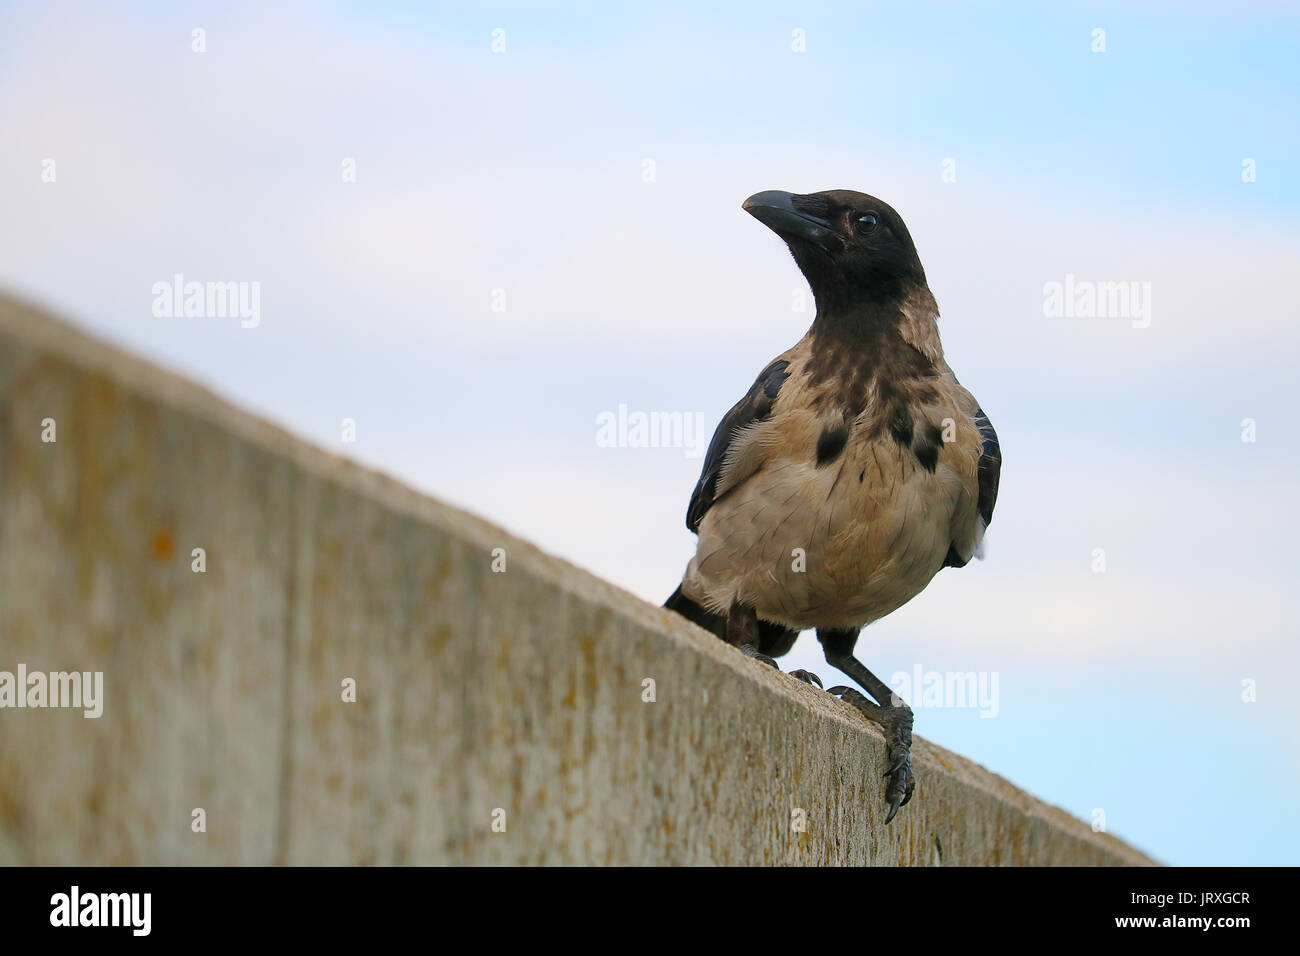 crow bird sitting on a wall under a clouded blue sky in berlin Stock Photo